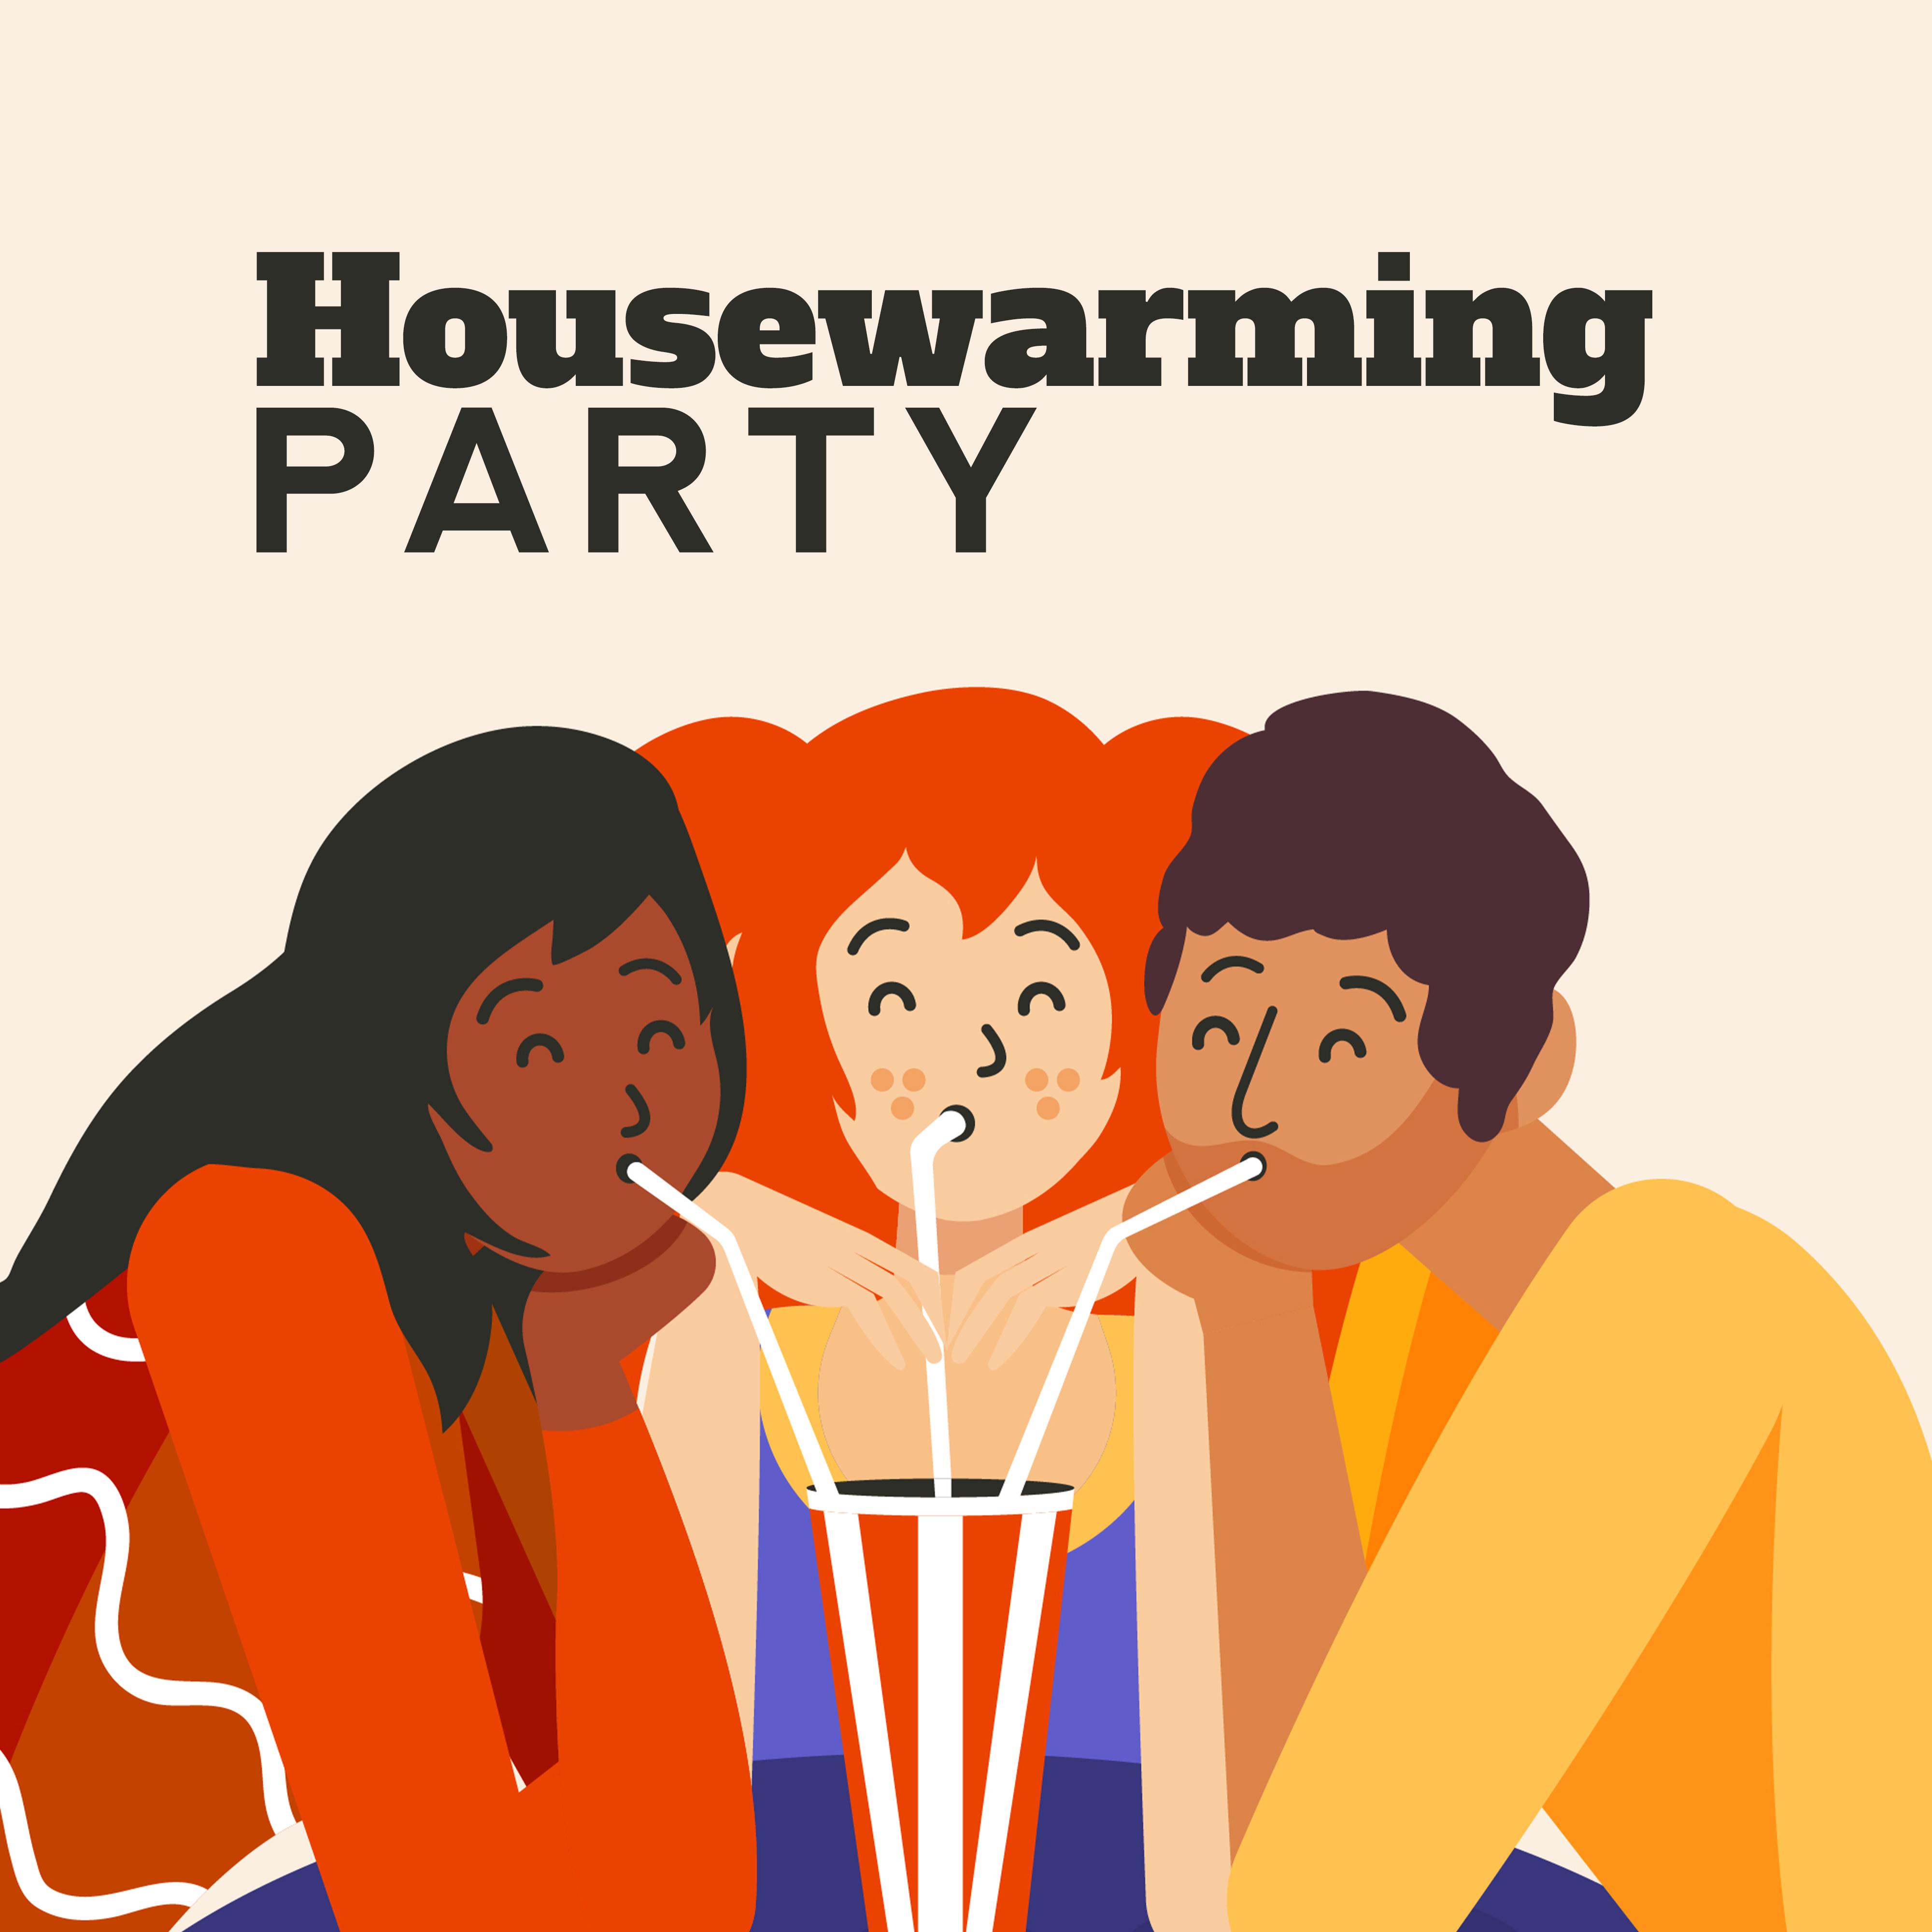 Housewarming Party - Best Chillout Music for a Party at Home, Meeting with Friends, a Barbecue, a Party in the Backyard Garden, Chillout Party Compilation